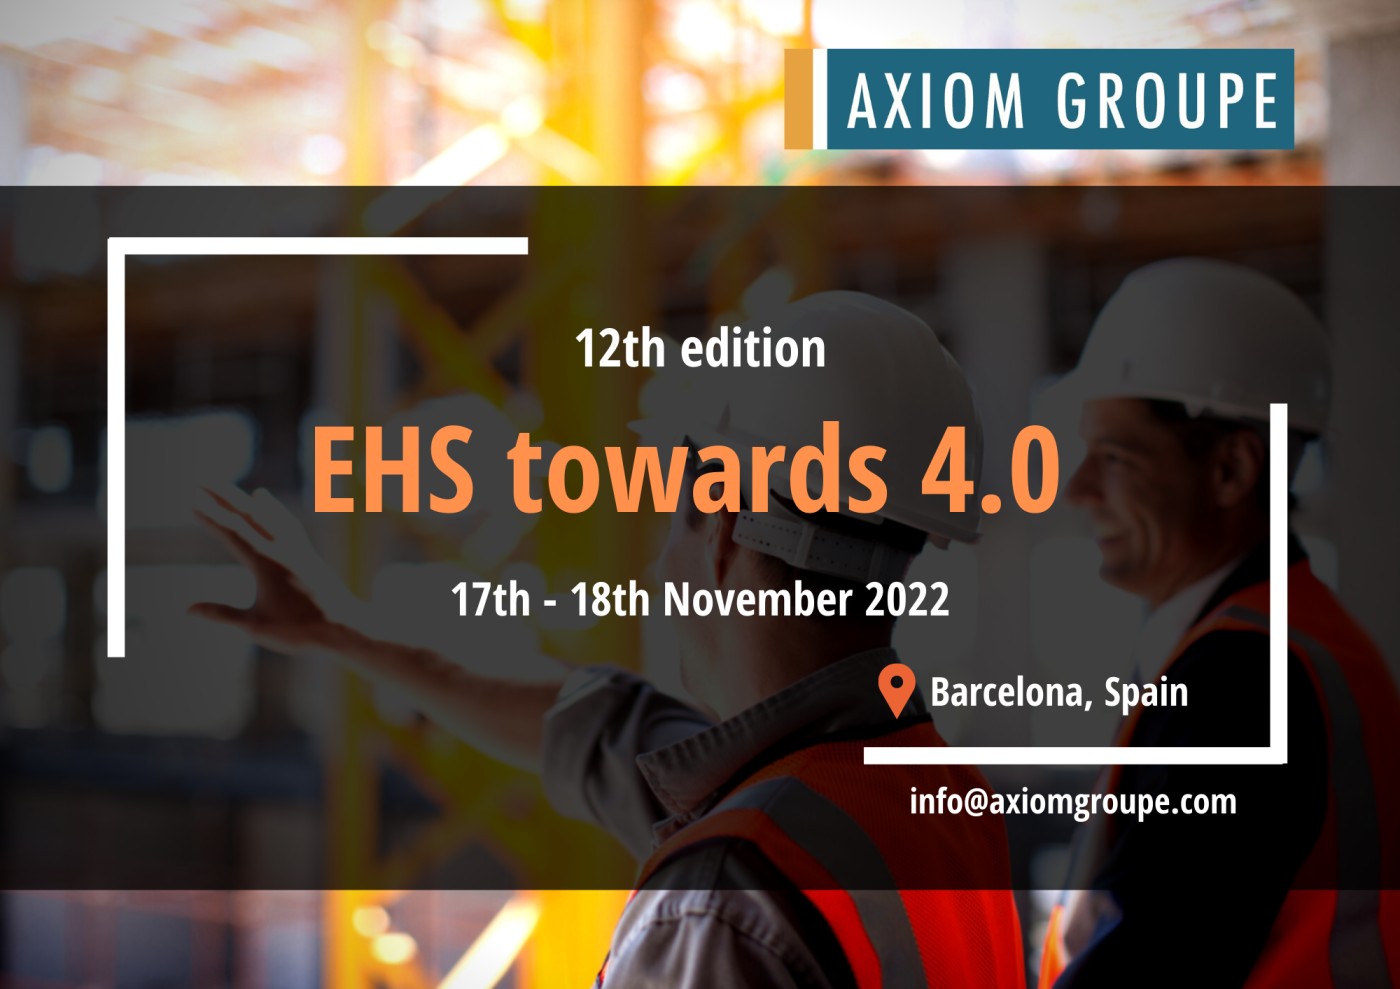 EHS Towards 4.0 organized by Axiom Groupe